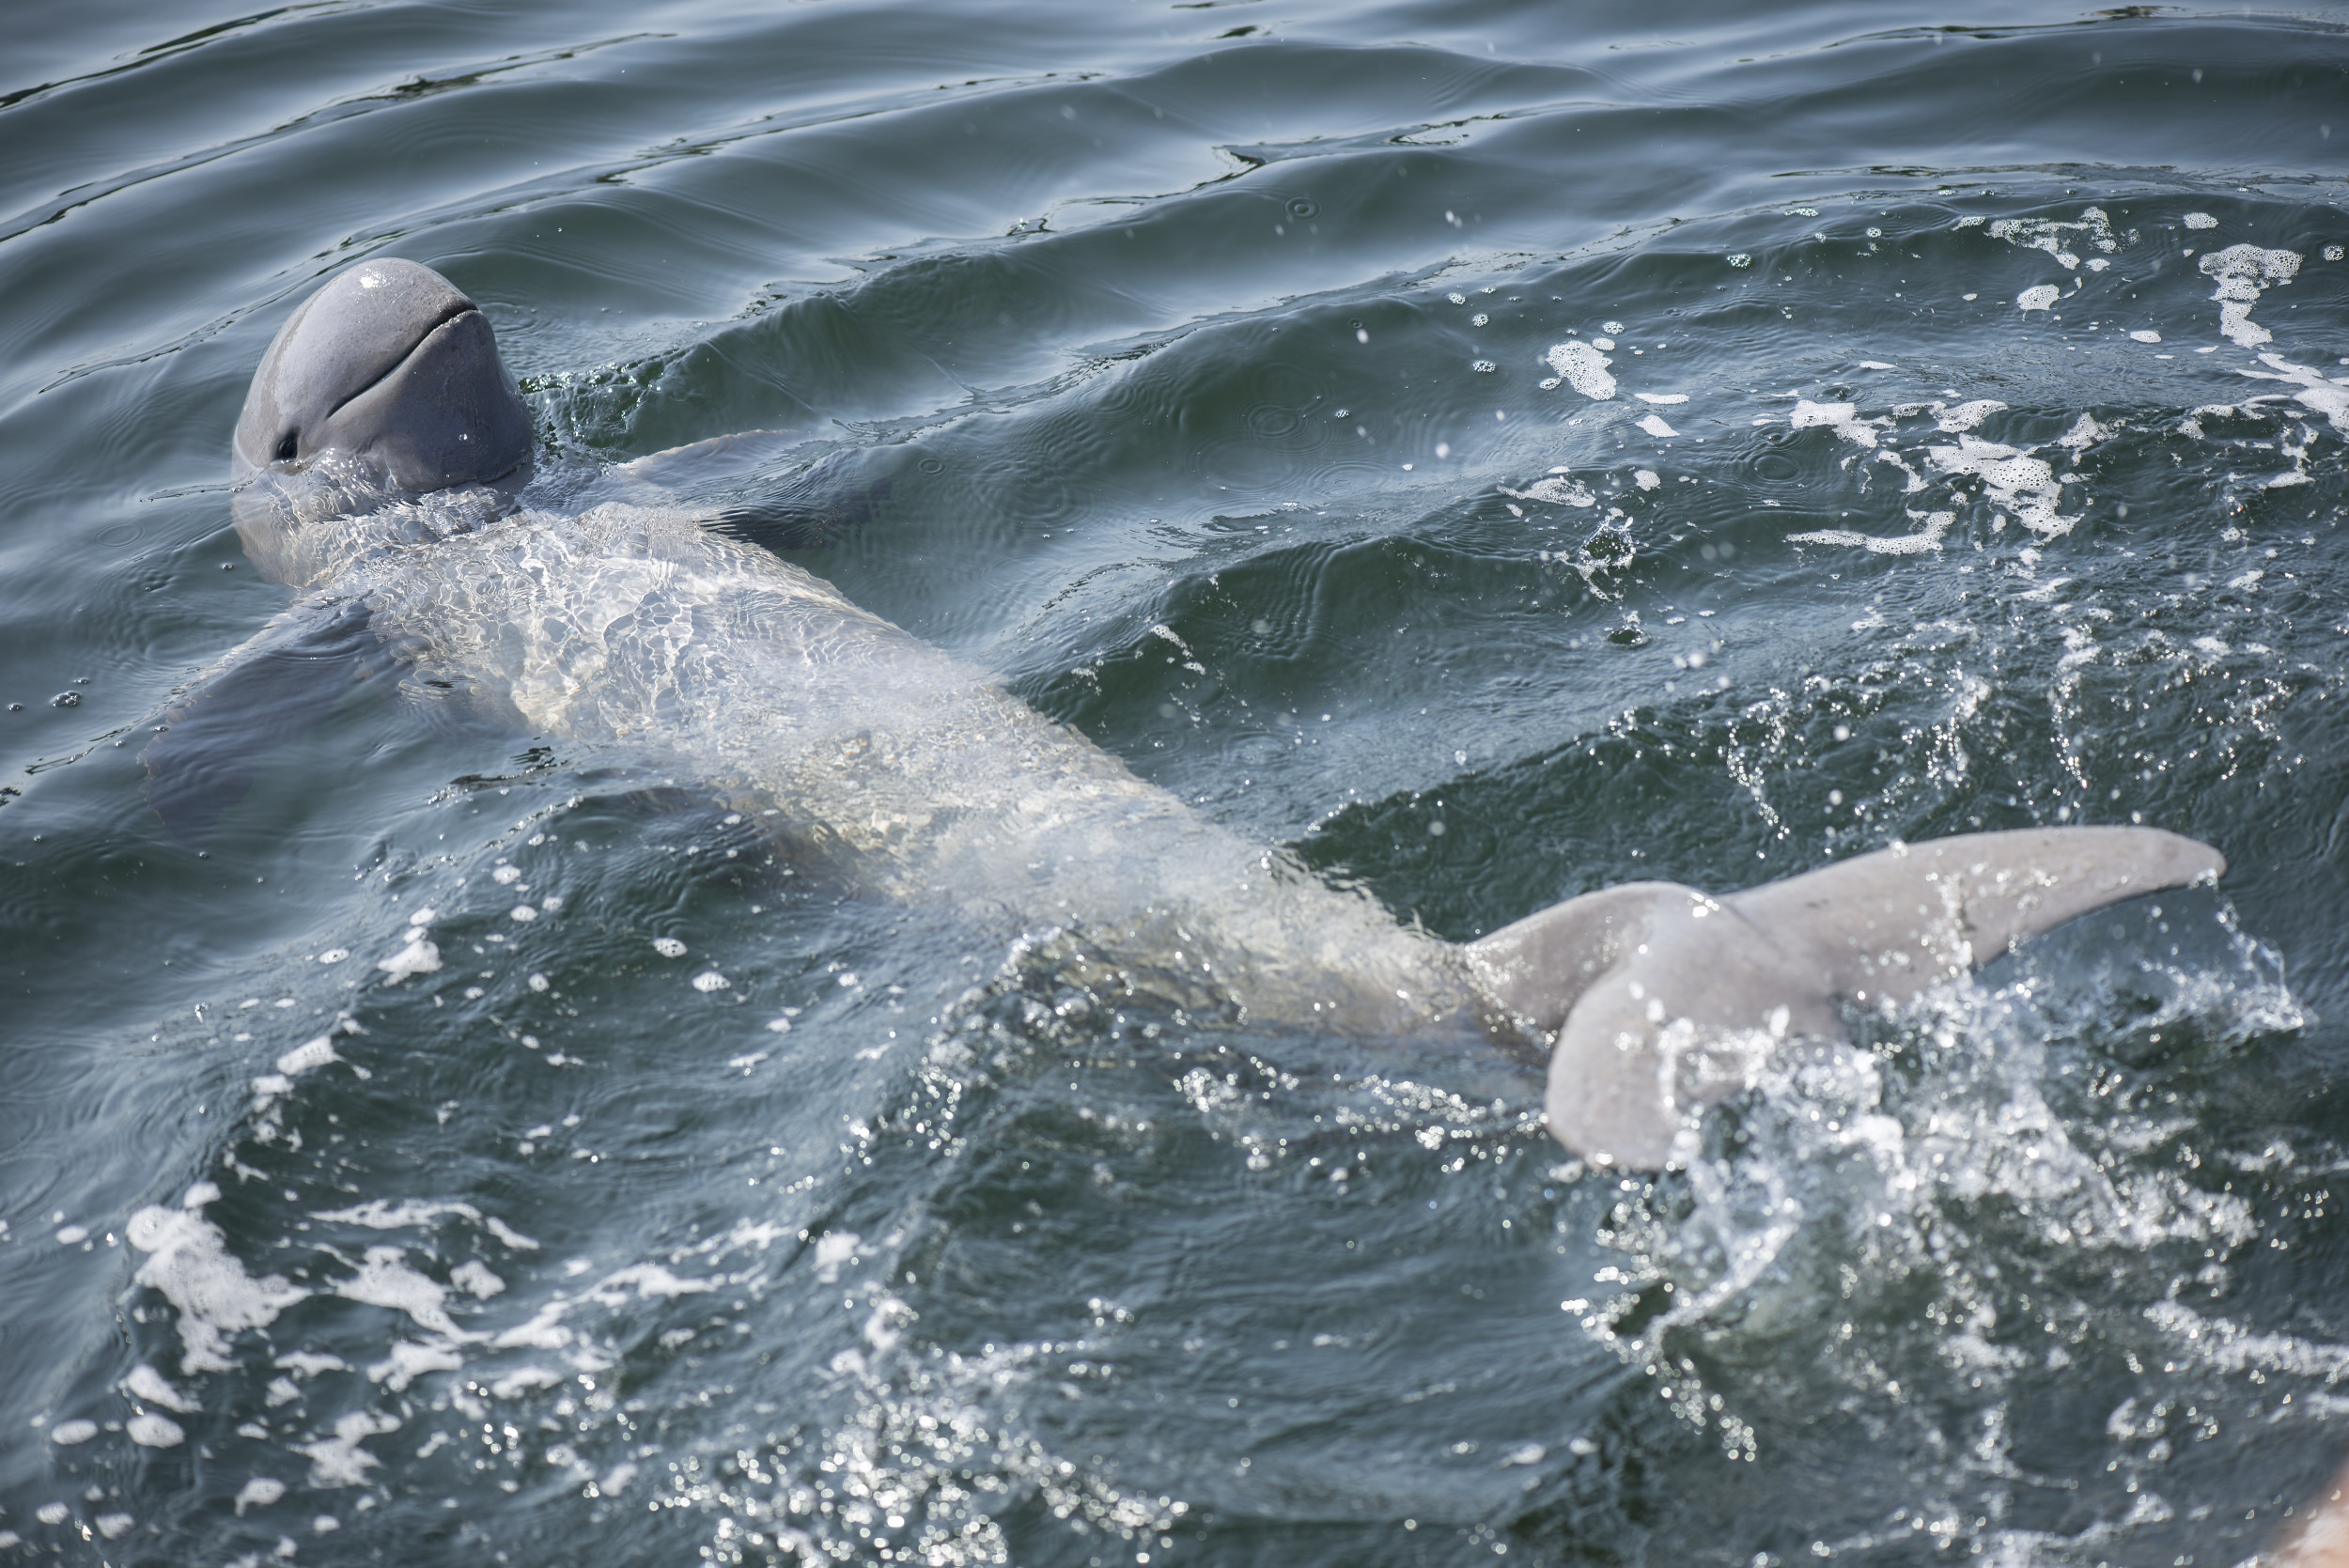 Dolphin Population Goes Extinct After Its Last Member Gets Entangled in